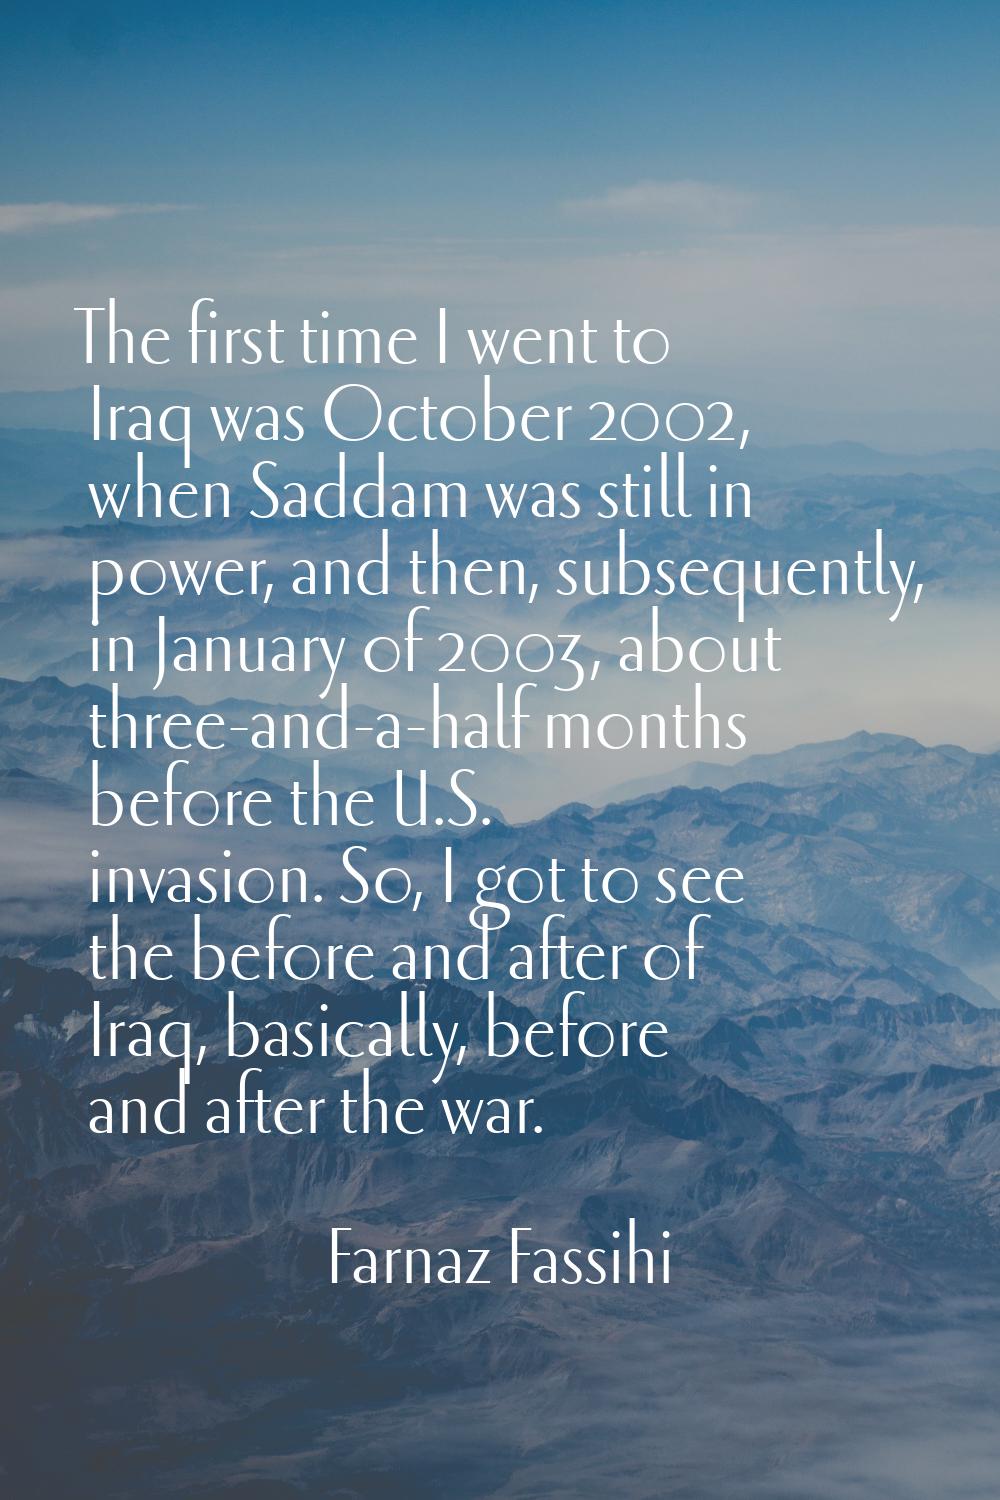 The first time I went to Iraq was October 2002, when Saddam was still in power, and then, subsequen